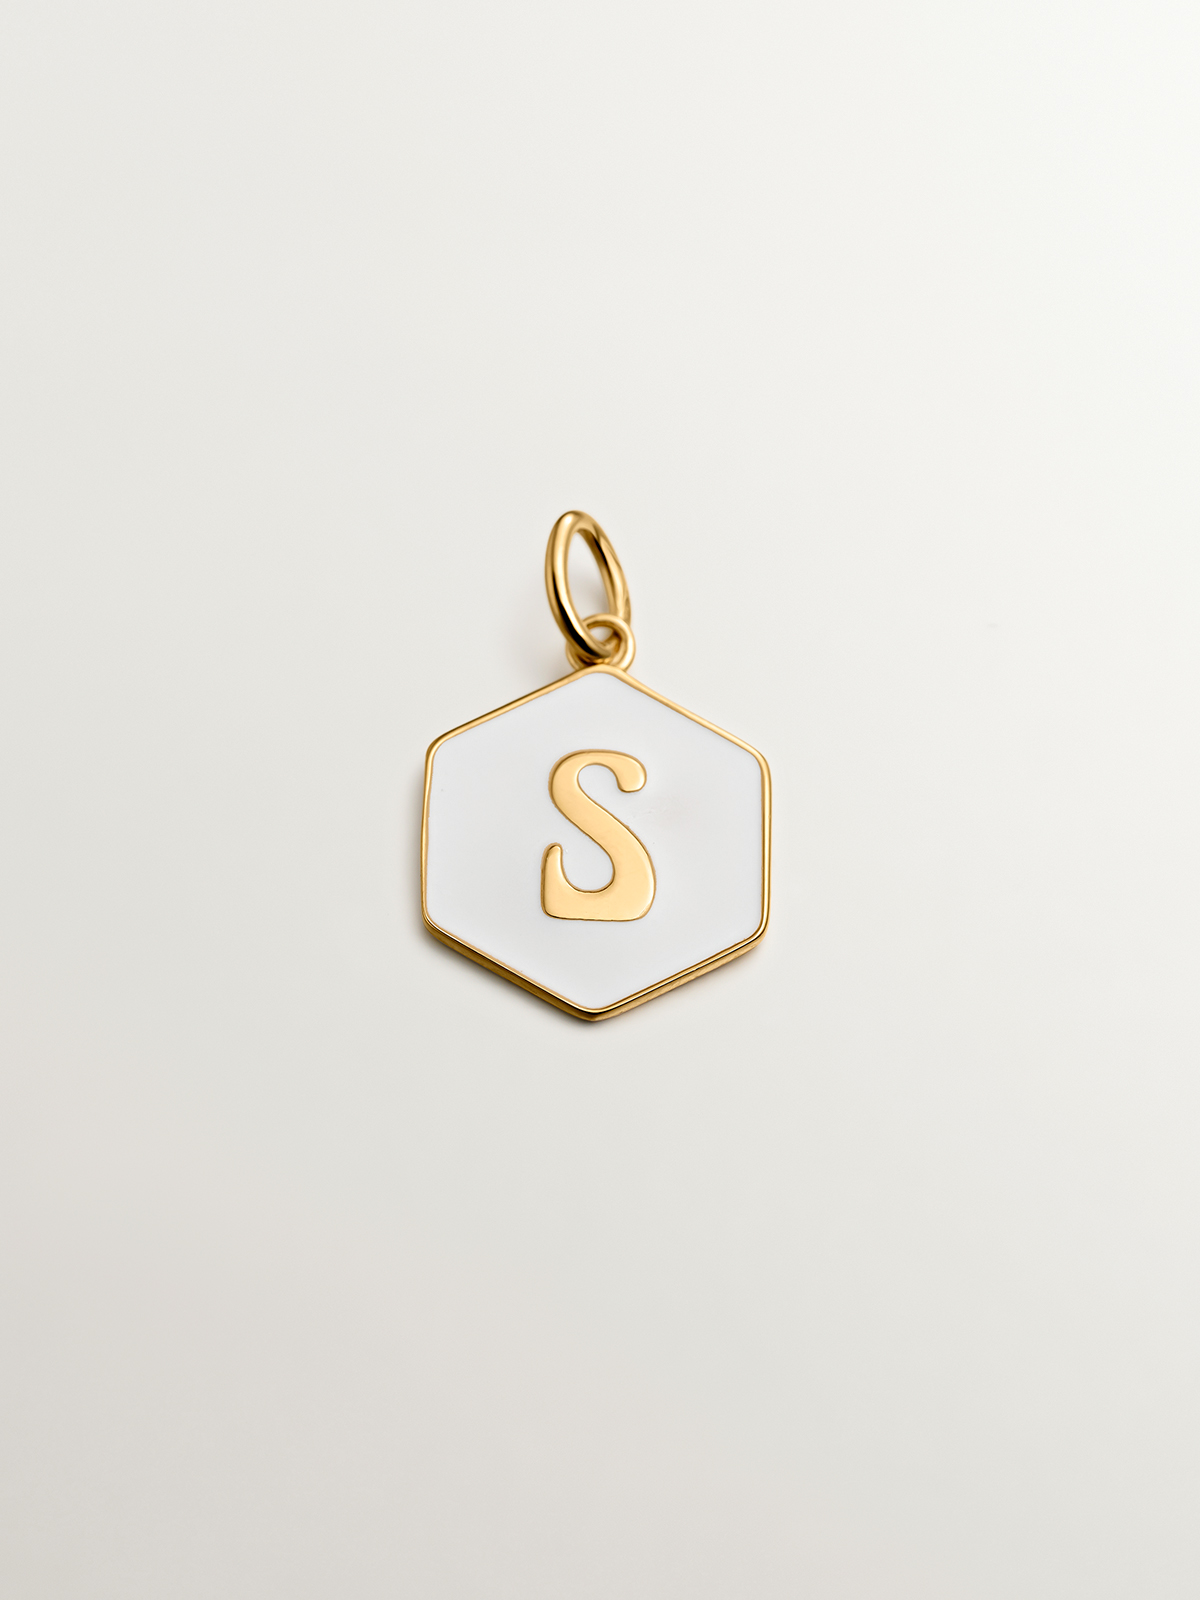 18K yellow gold plated 925 sterling silver charm with initial S and white enamel with hexagonal shape